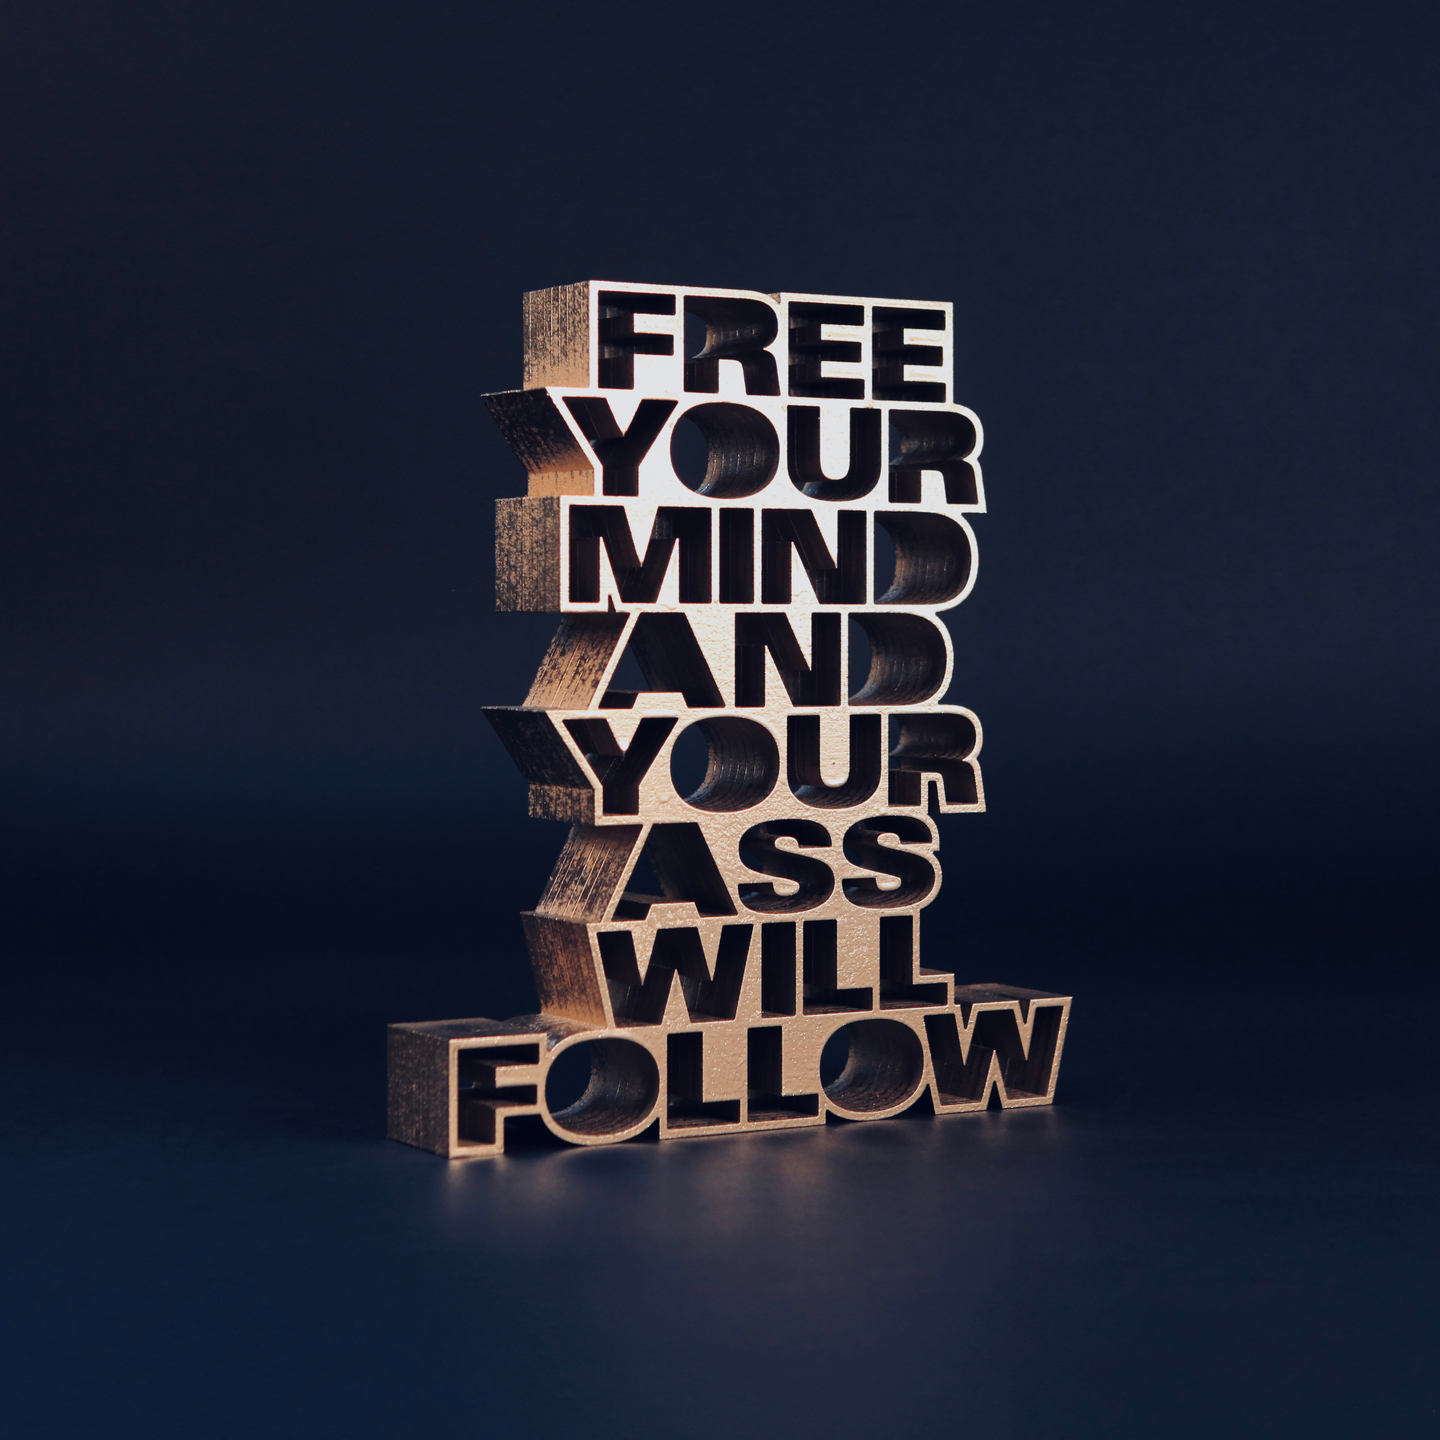 Free your mind and your ass will follow